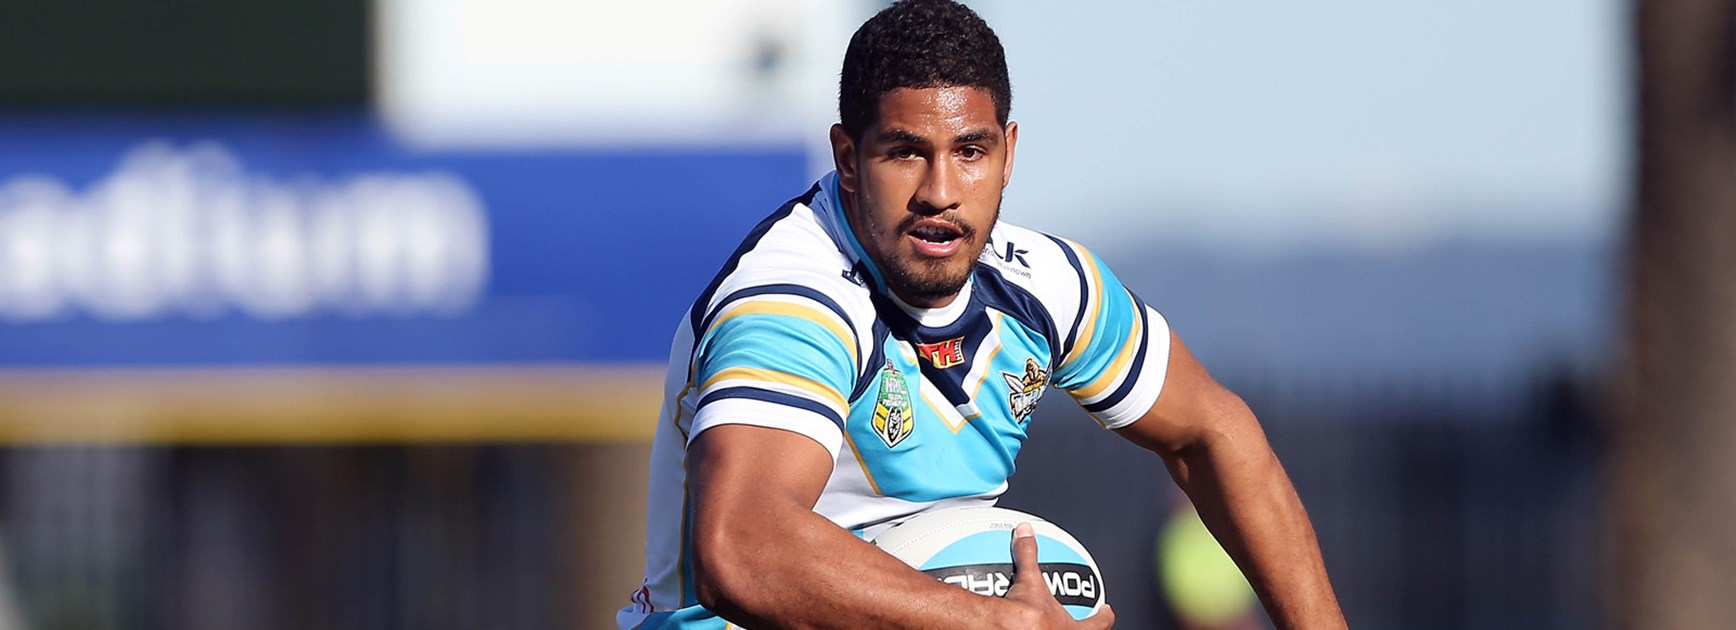 Nene Macdonald in action for the Titans against the Roosters in Round 16.